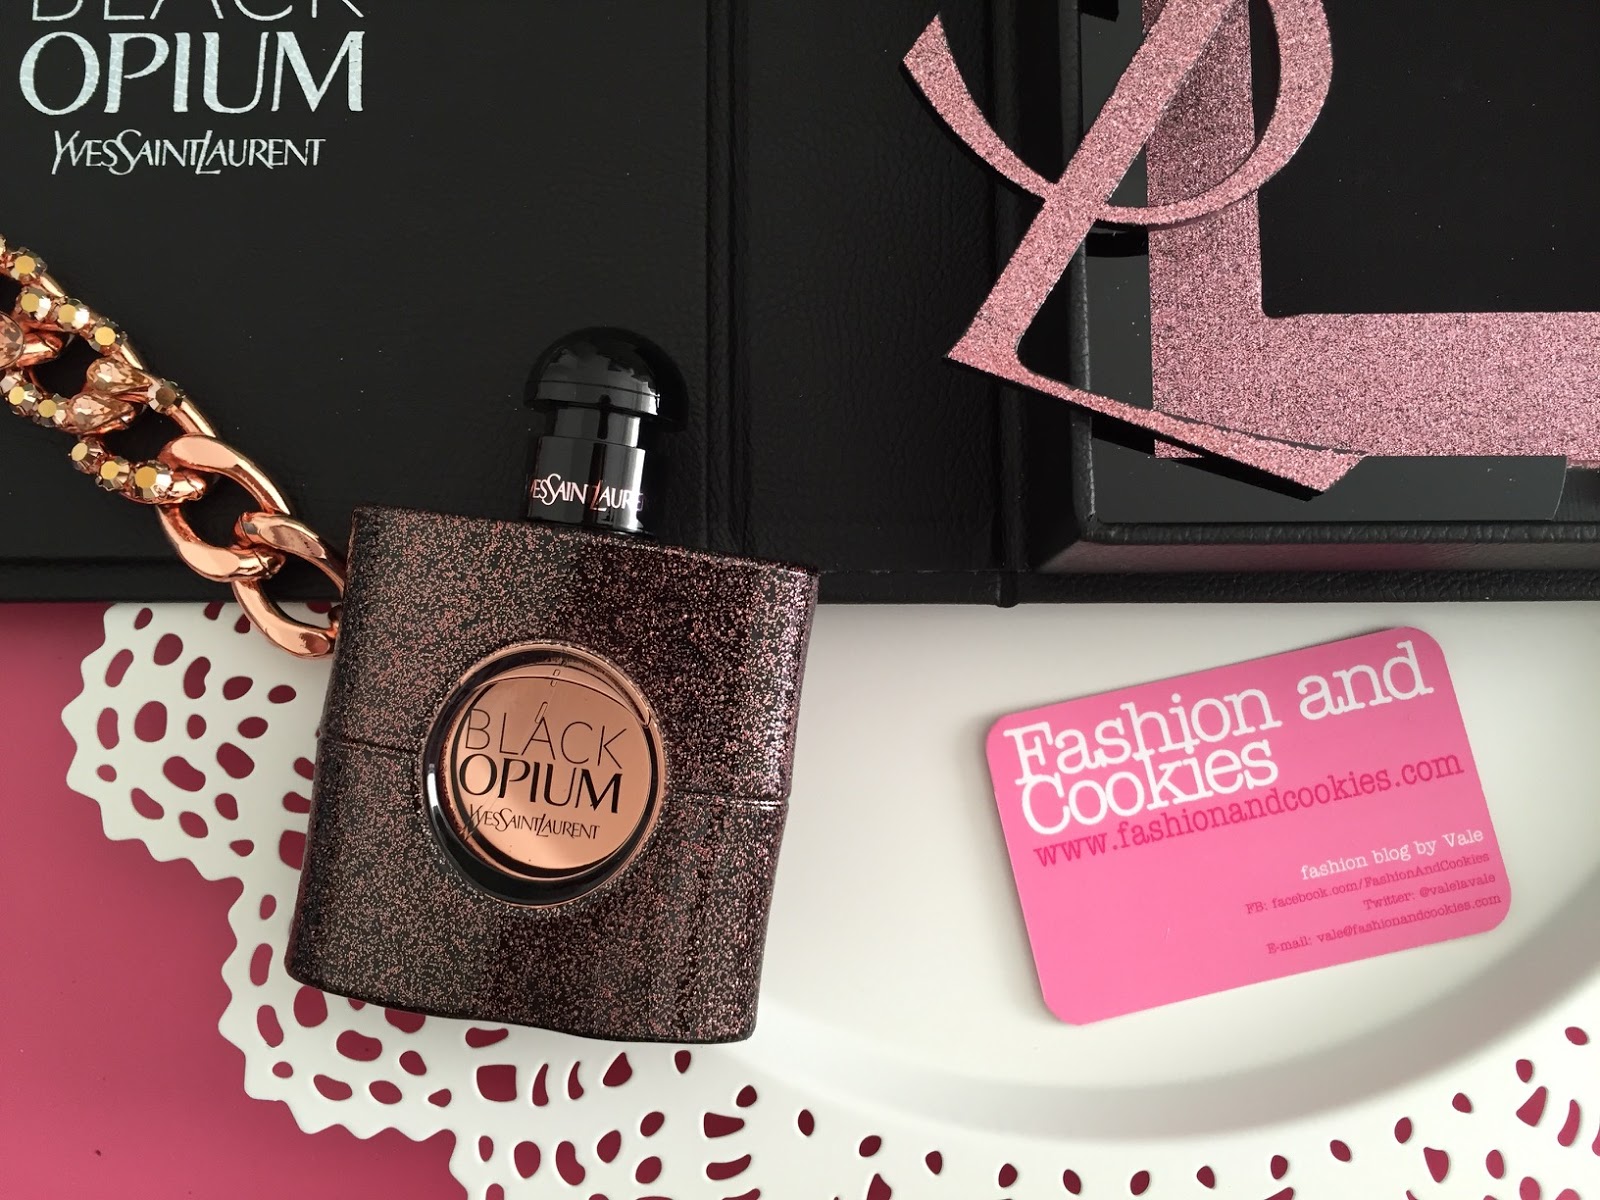 YSL Black Opium Eau de Toilette review on Fashion and Cookies fashion and beauty blog